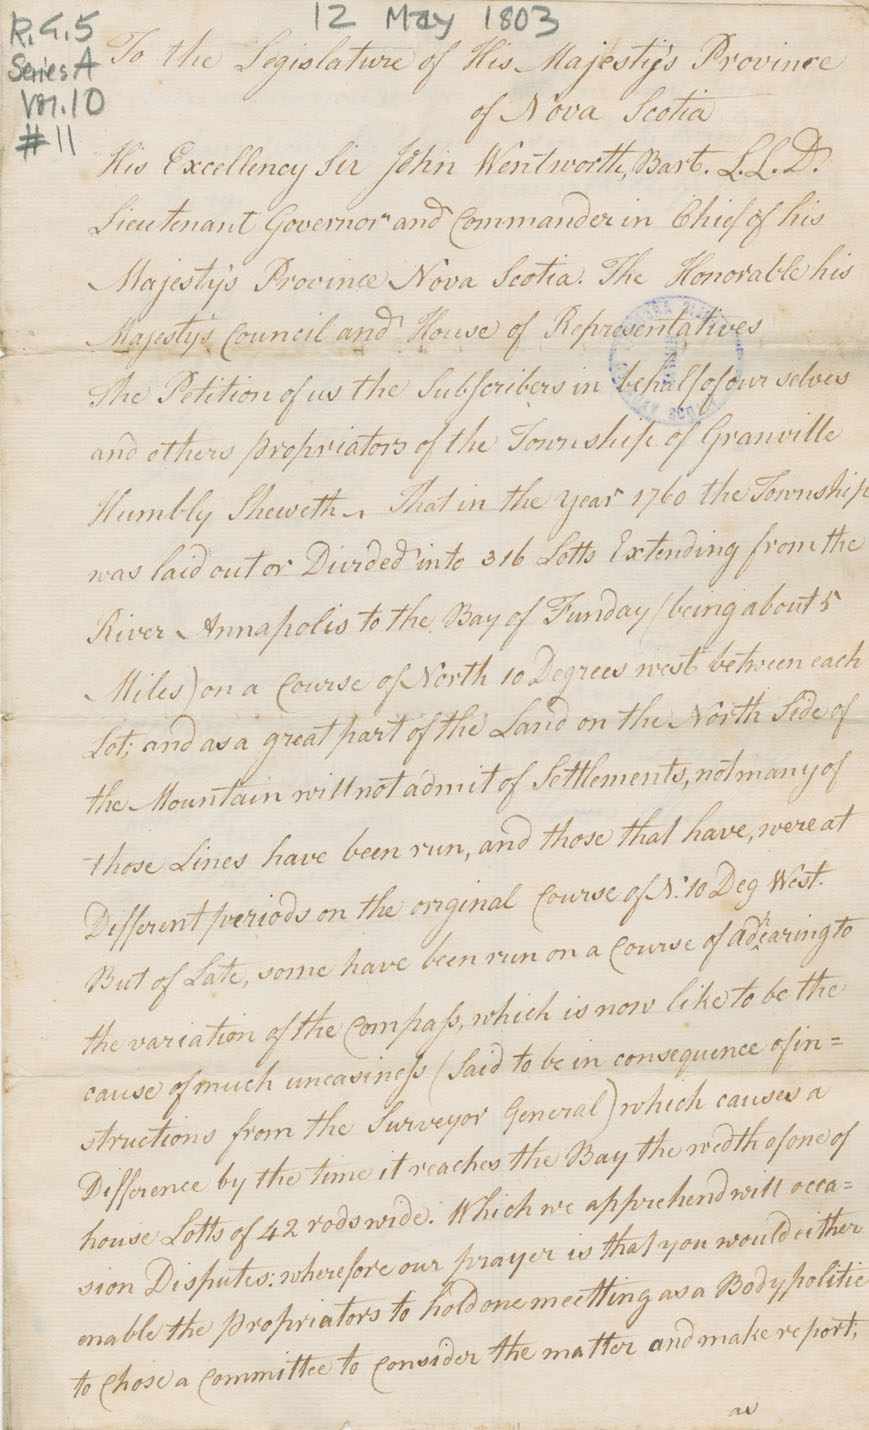 assembly : Petition of Josiah Dodge and other inhabitants of the Township of Granville, asking that the legislature enable the proprietors to hold a me